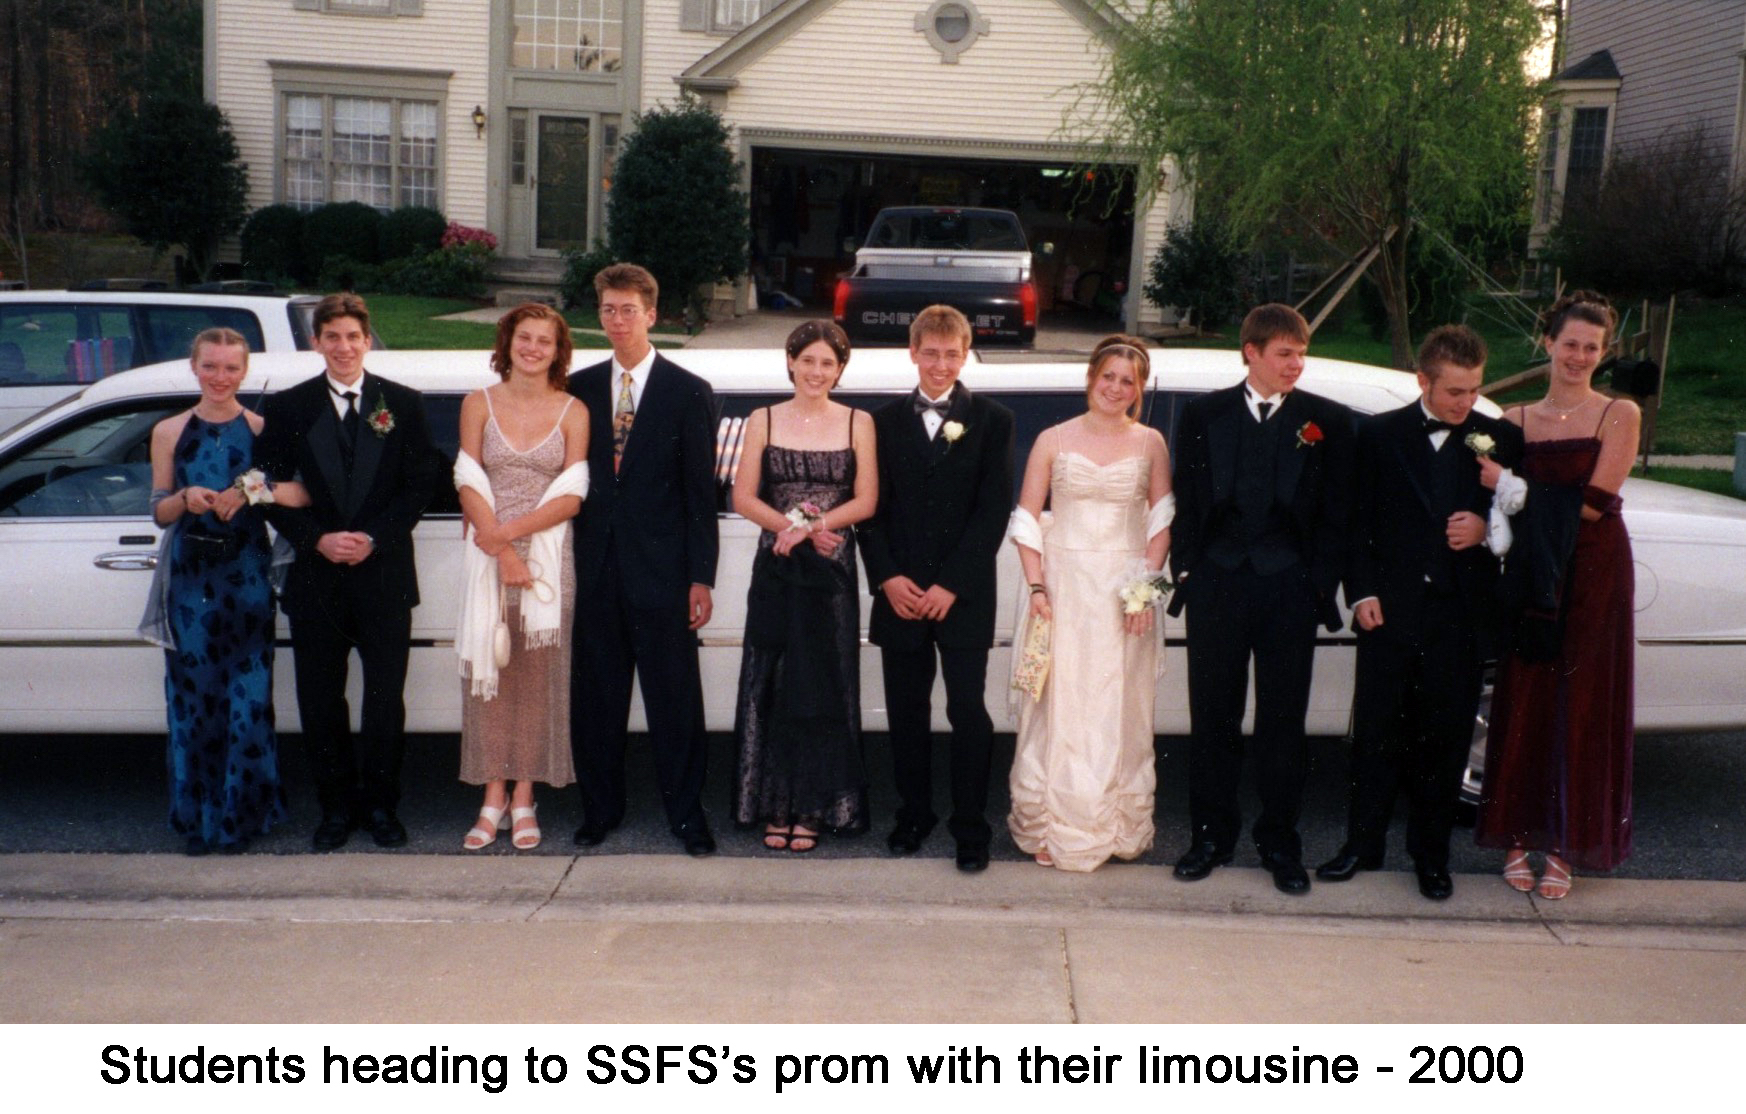 Five couples standing in front of the long white limo